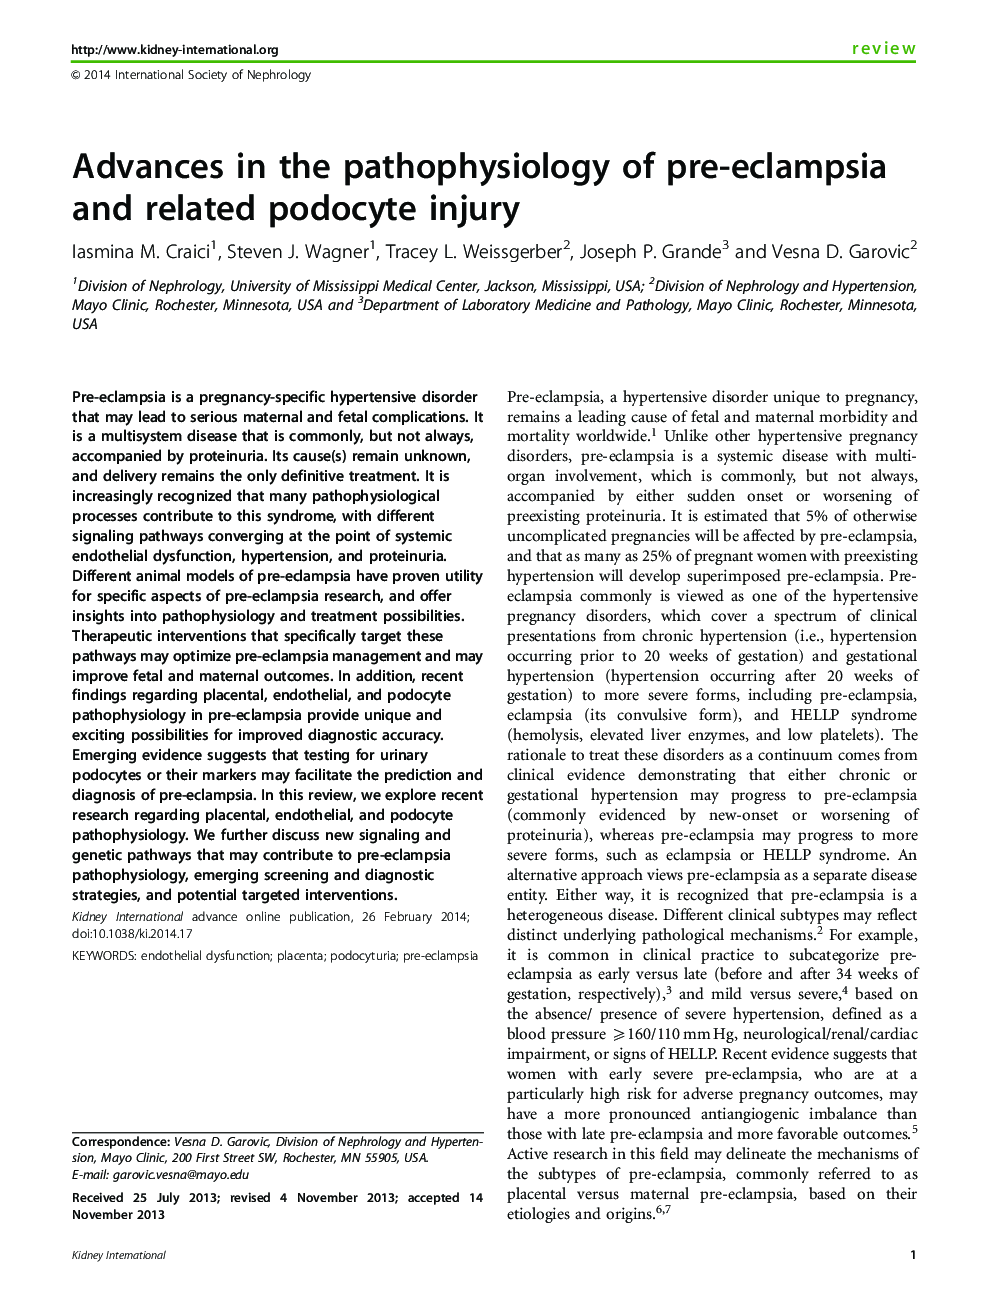 Advances in the pathophysiology of pre-eclampsia and related podocyte injury